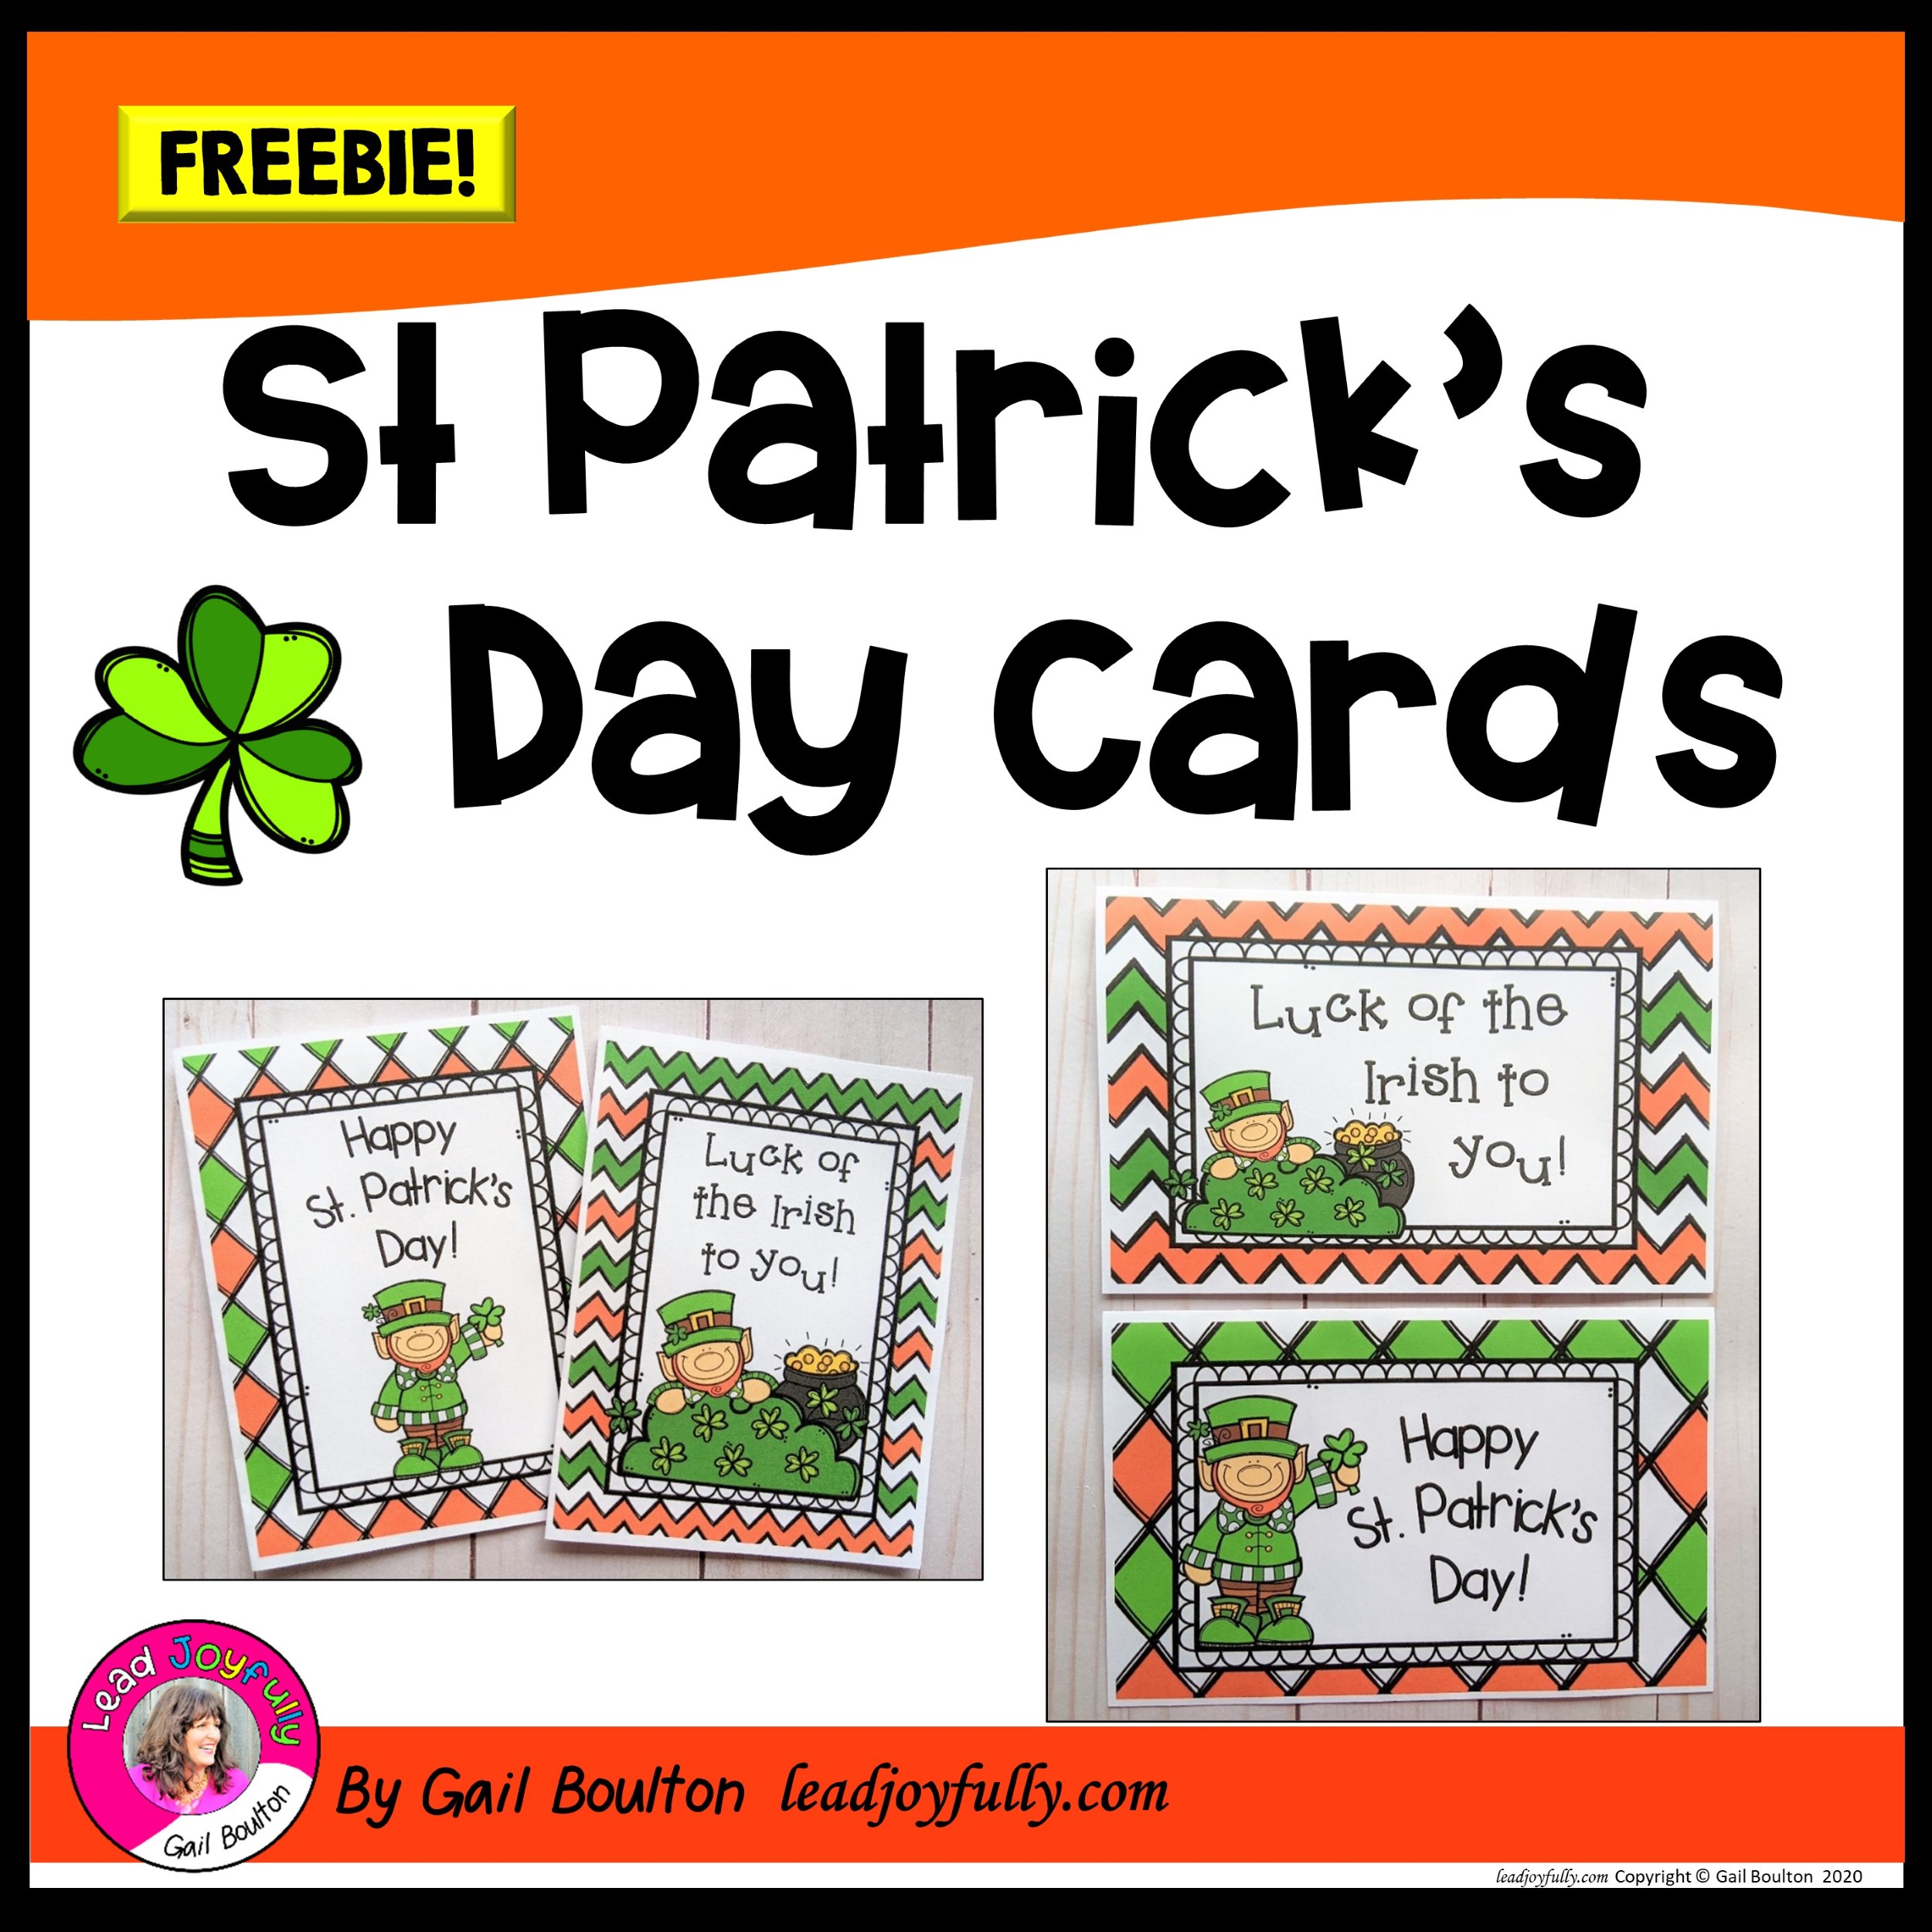 Free Printable St. Patrick's Day Card